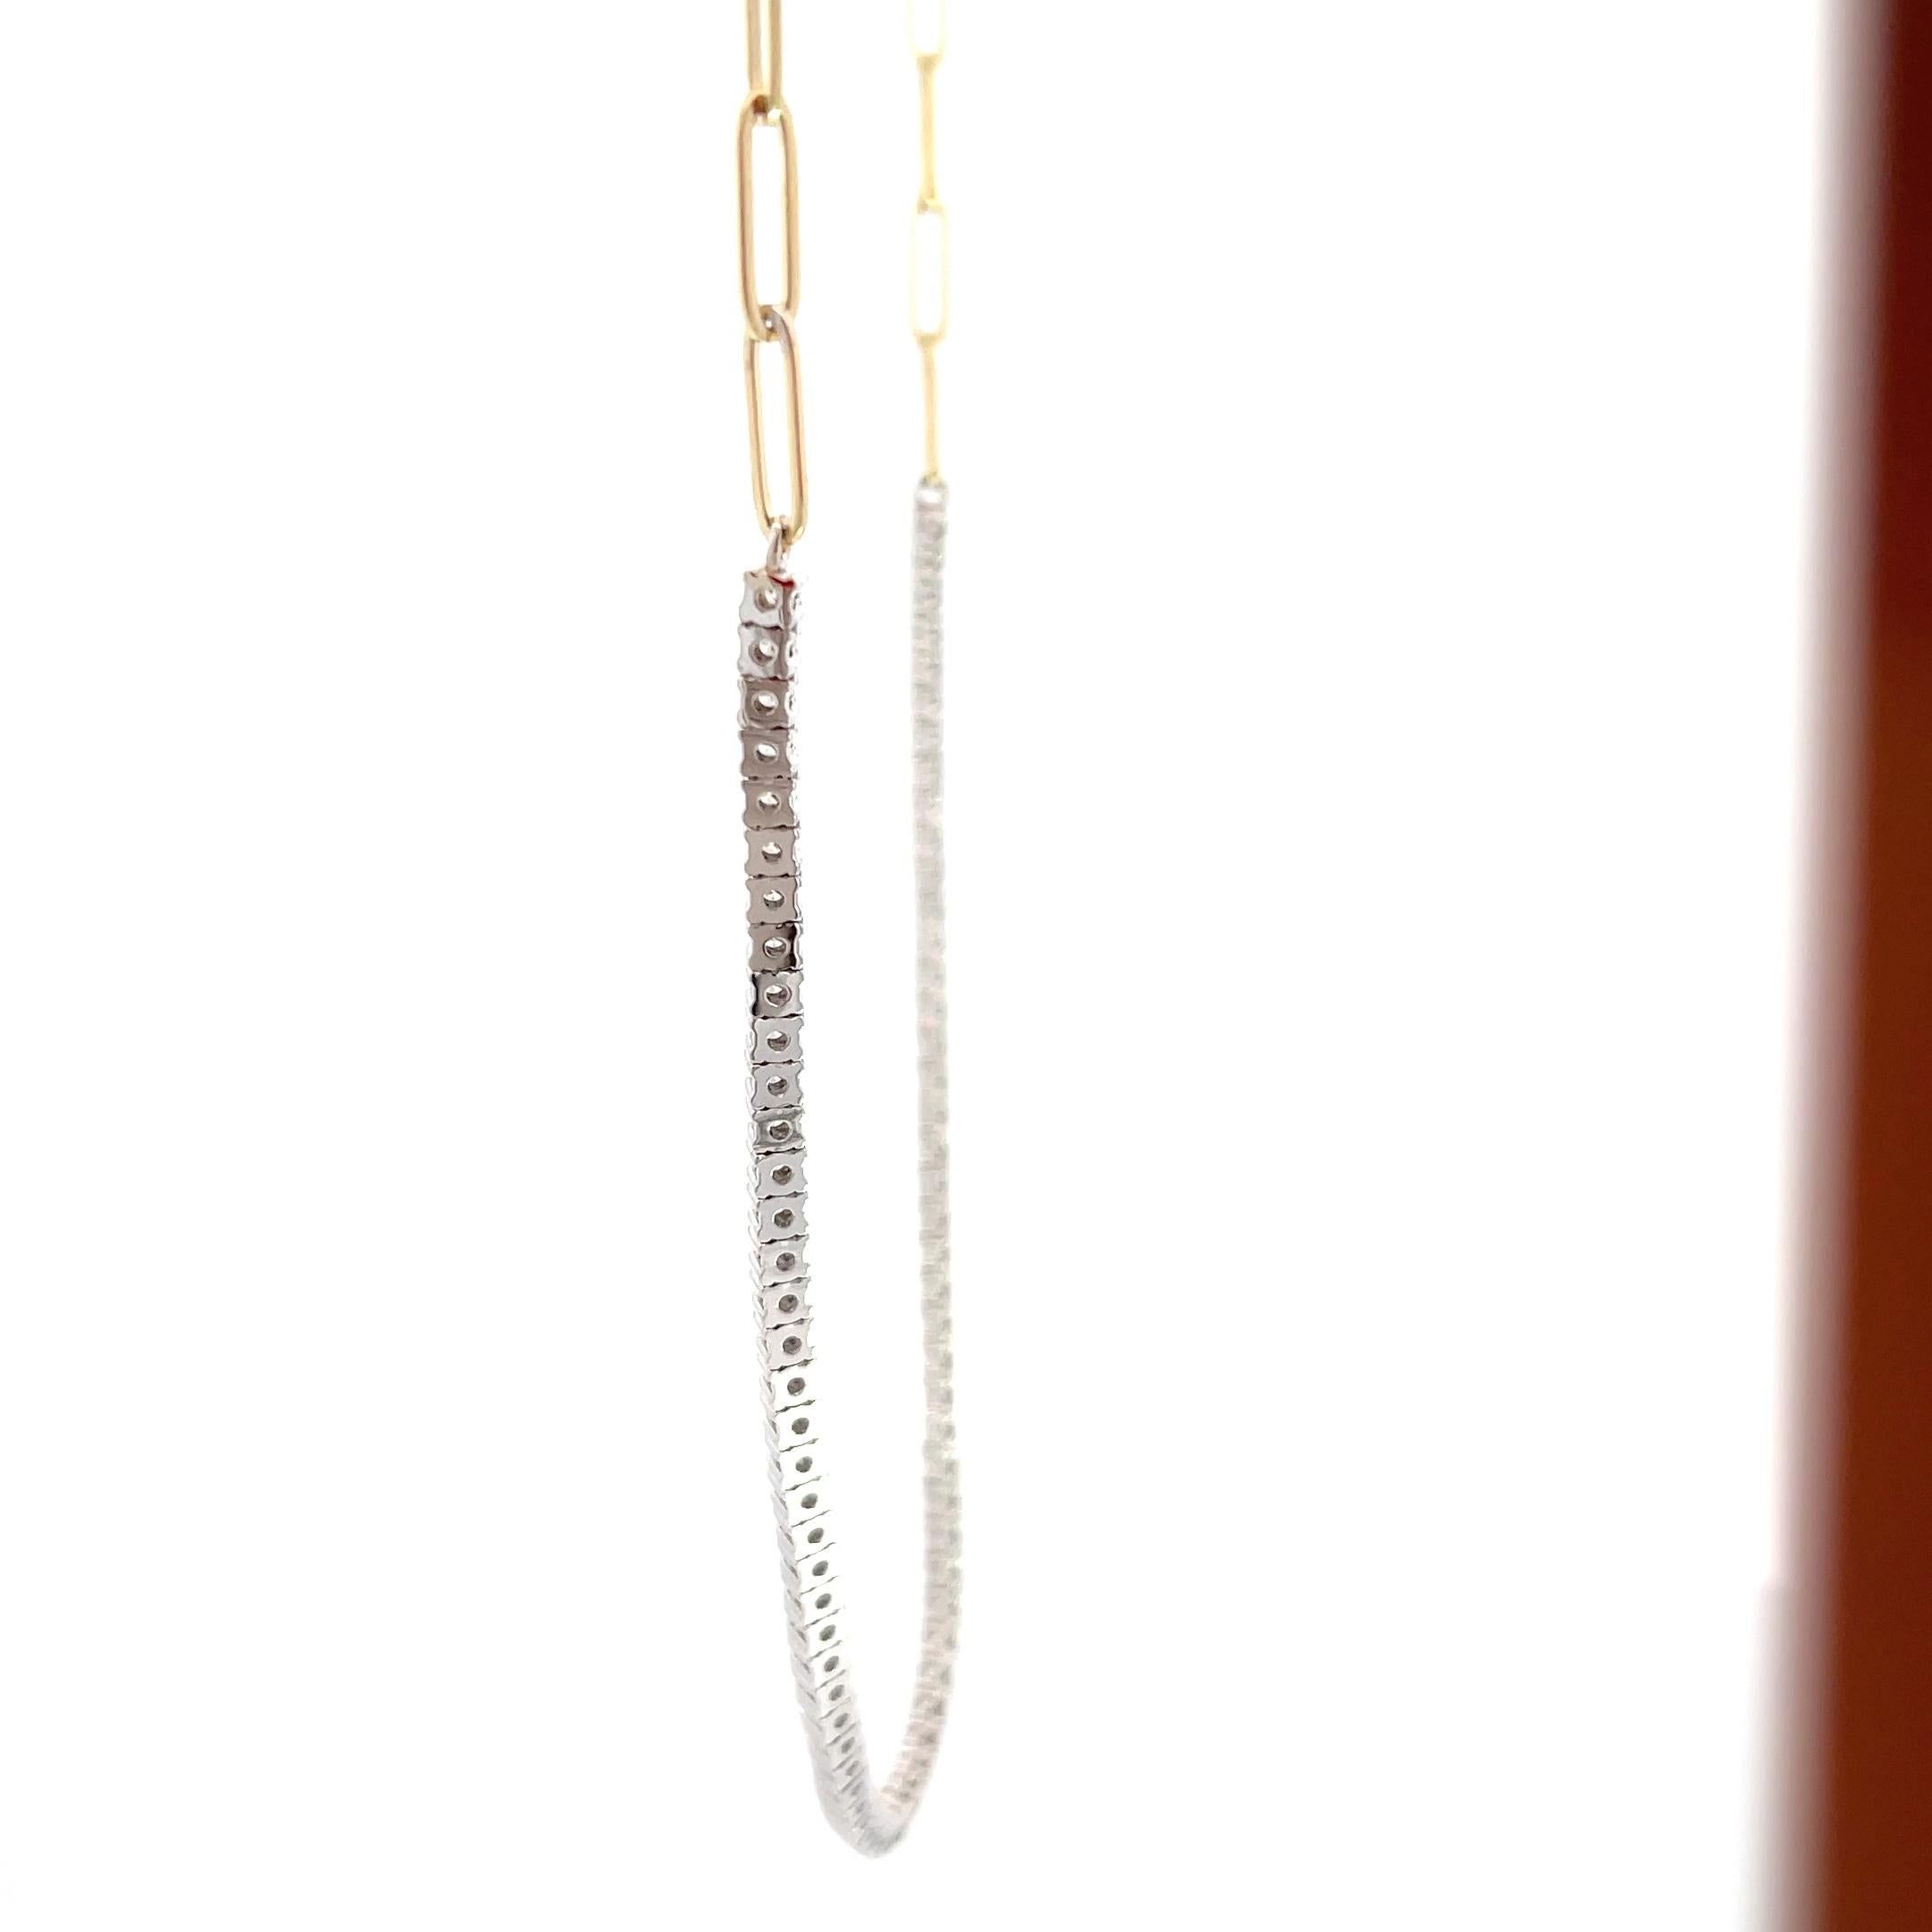 Introducing the epitome of elegance and sophistication, our 14K Yellow & White Gold 2.40ctw Diamond Tennis Necklace with a mesmerizing paperclip chain. Crafted to captivate the eye, this stunning piece exudes timeless beauty that will leave you